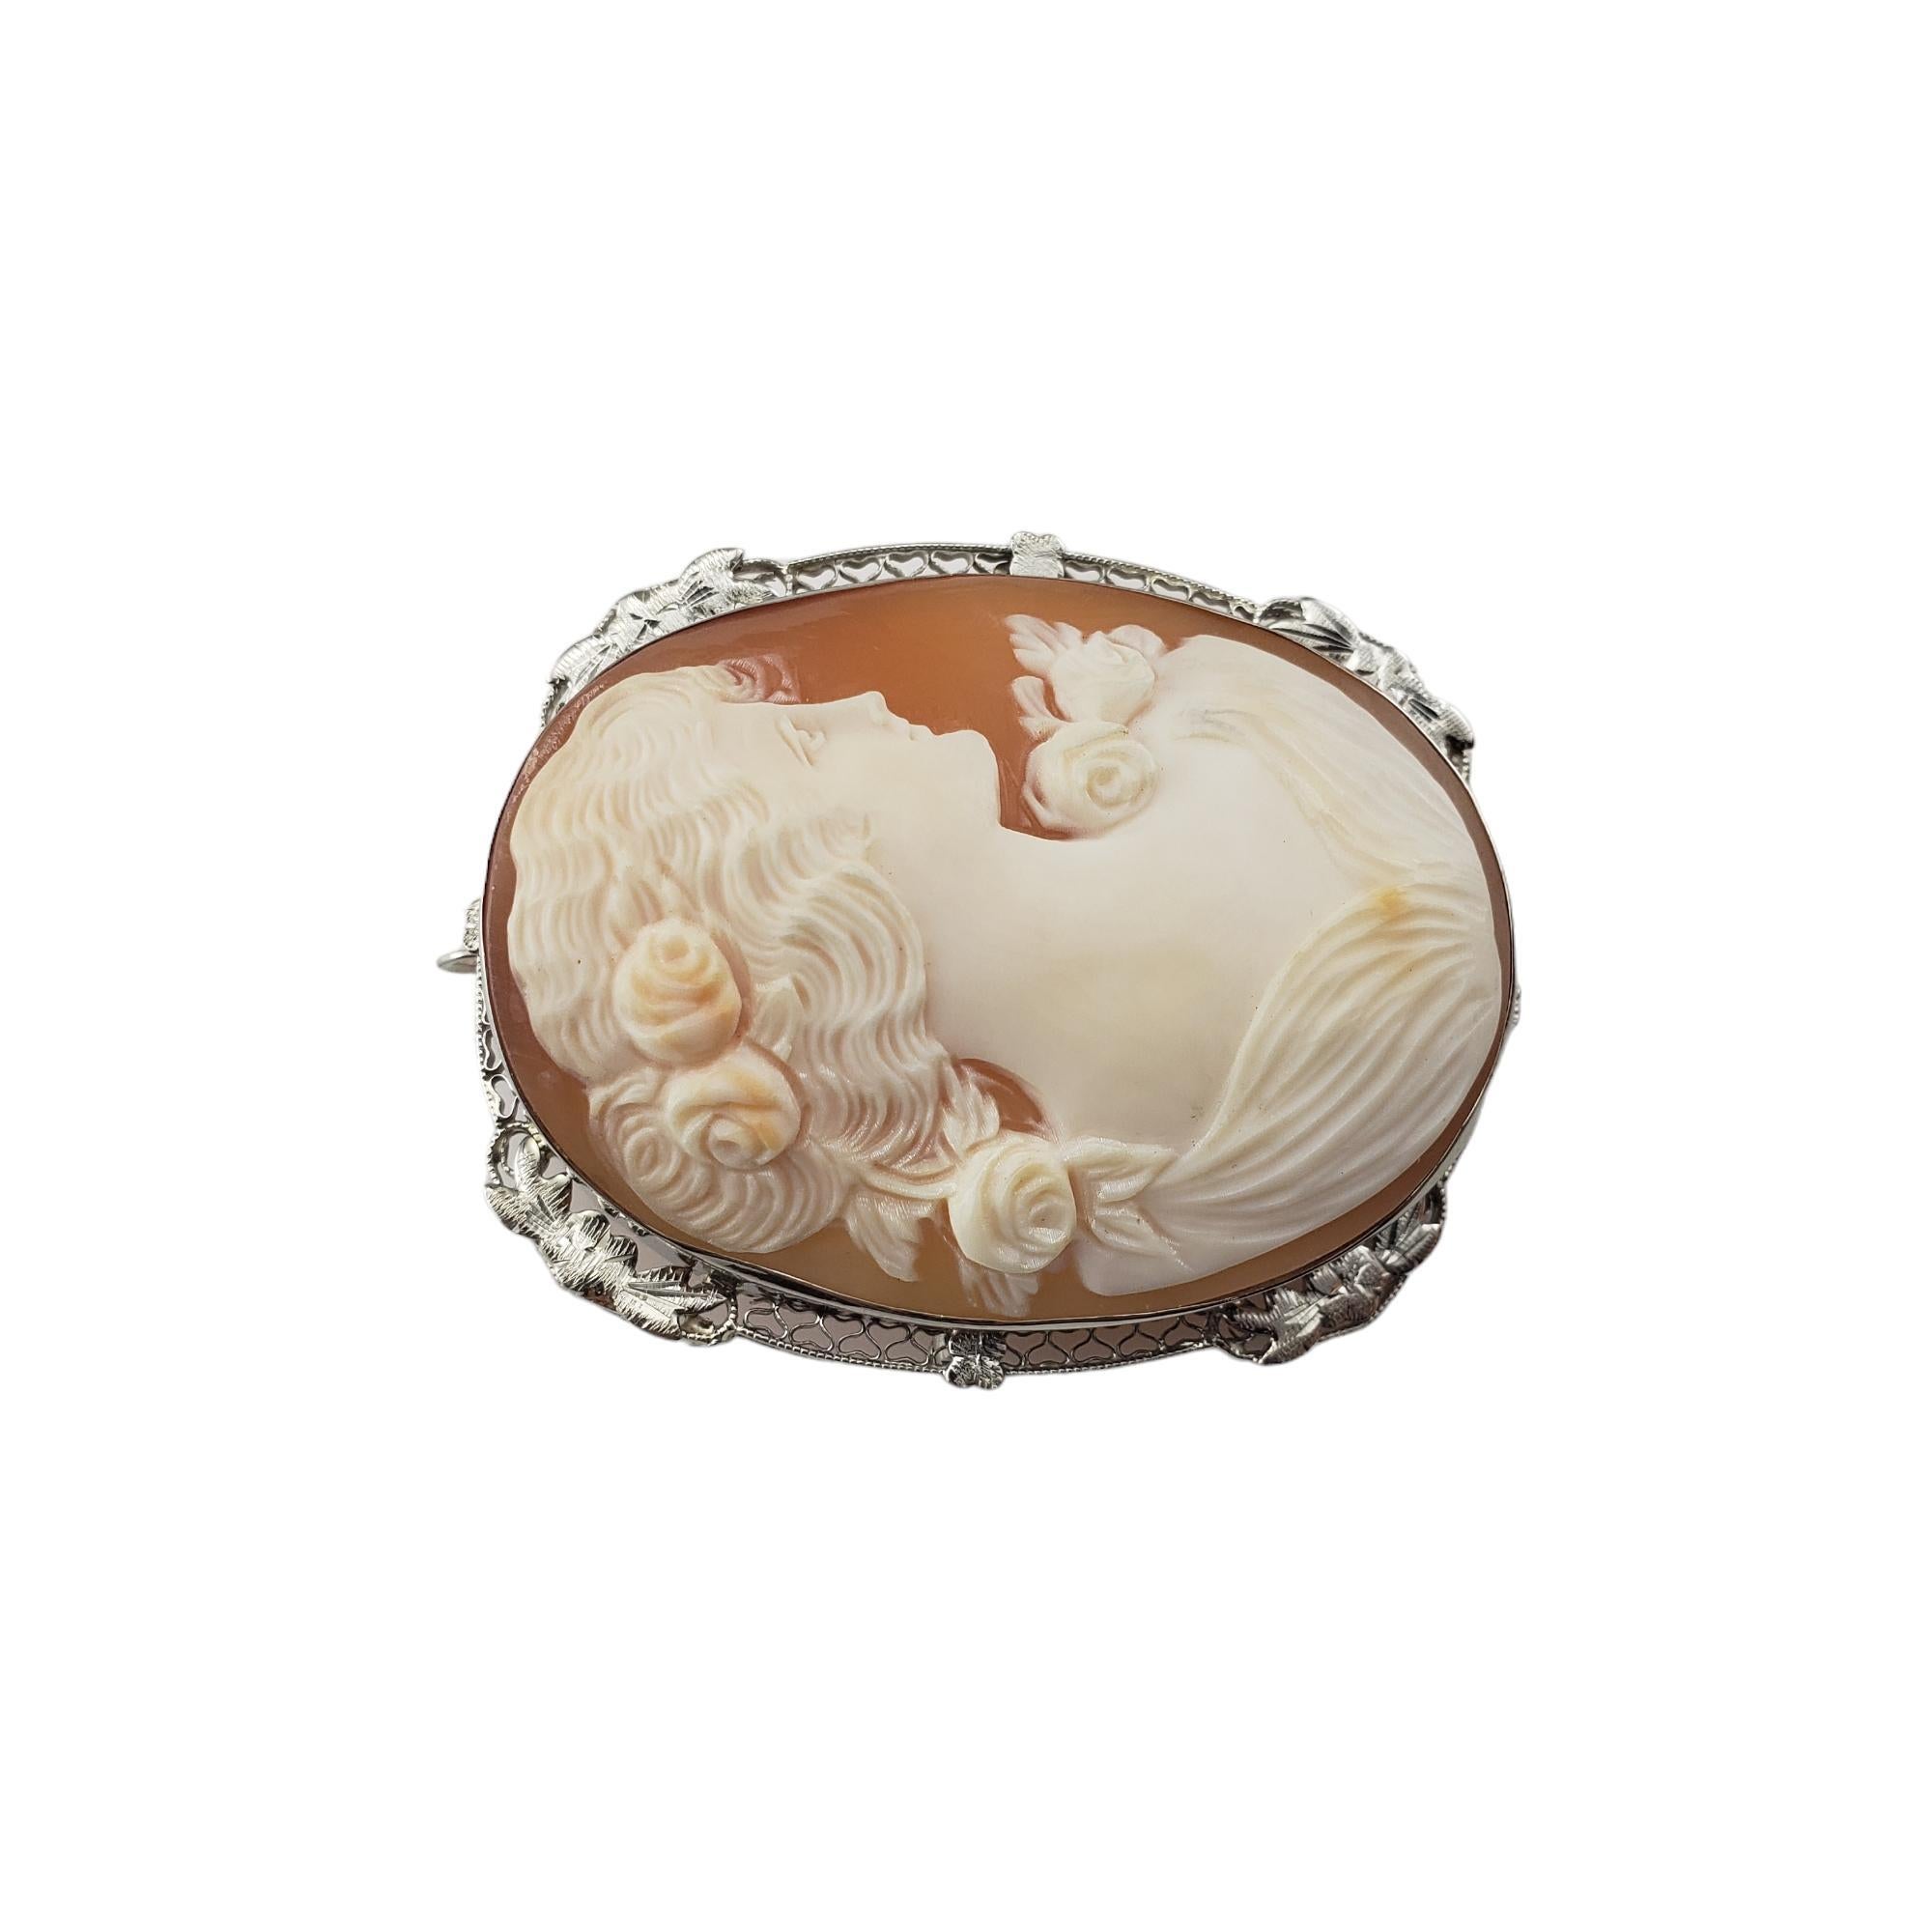 Vintage 14 Karat White Gold Cameo Brooch/Pendant-

This stunning cameo features a lovely lady in profile set in beautifully detailed 14K white gold filigree.  Can be worn as a brooch or a pendant.

Size:  48.4 mm x 39.2 mm

Stamped: 14K

Weight: